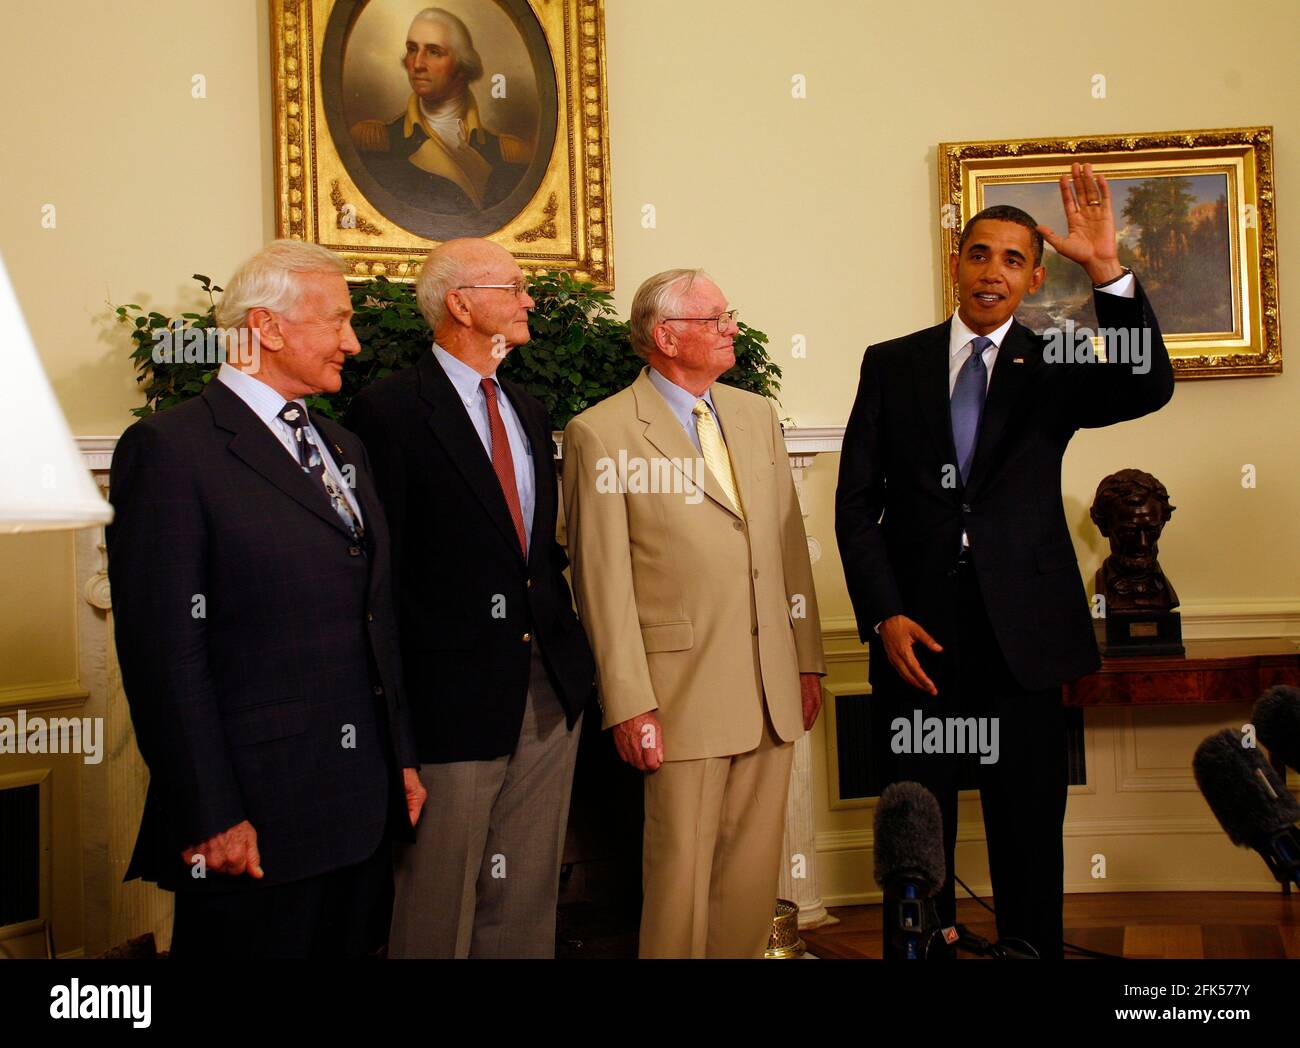 Washington, DC - July 20, 2009 -- United States President Barack Obama meets with Apollo 11 crew members (l-r) Edwin Eugene 'Buzz' Aldrin, Jr., Michael Collins, and Neil Armstrong in the Oval Office of the White House on the 40th anniversary of the astronauts' lunar landing, Washington, DC, Monday, July 20, 2009. Credit: Martin H. Simon/Pool via CNP | usage worldwide Stock Photo